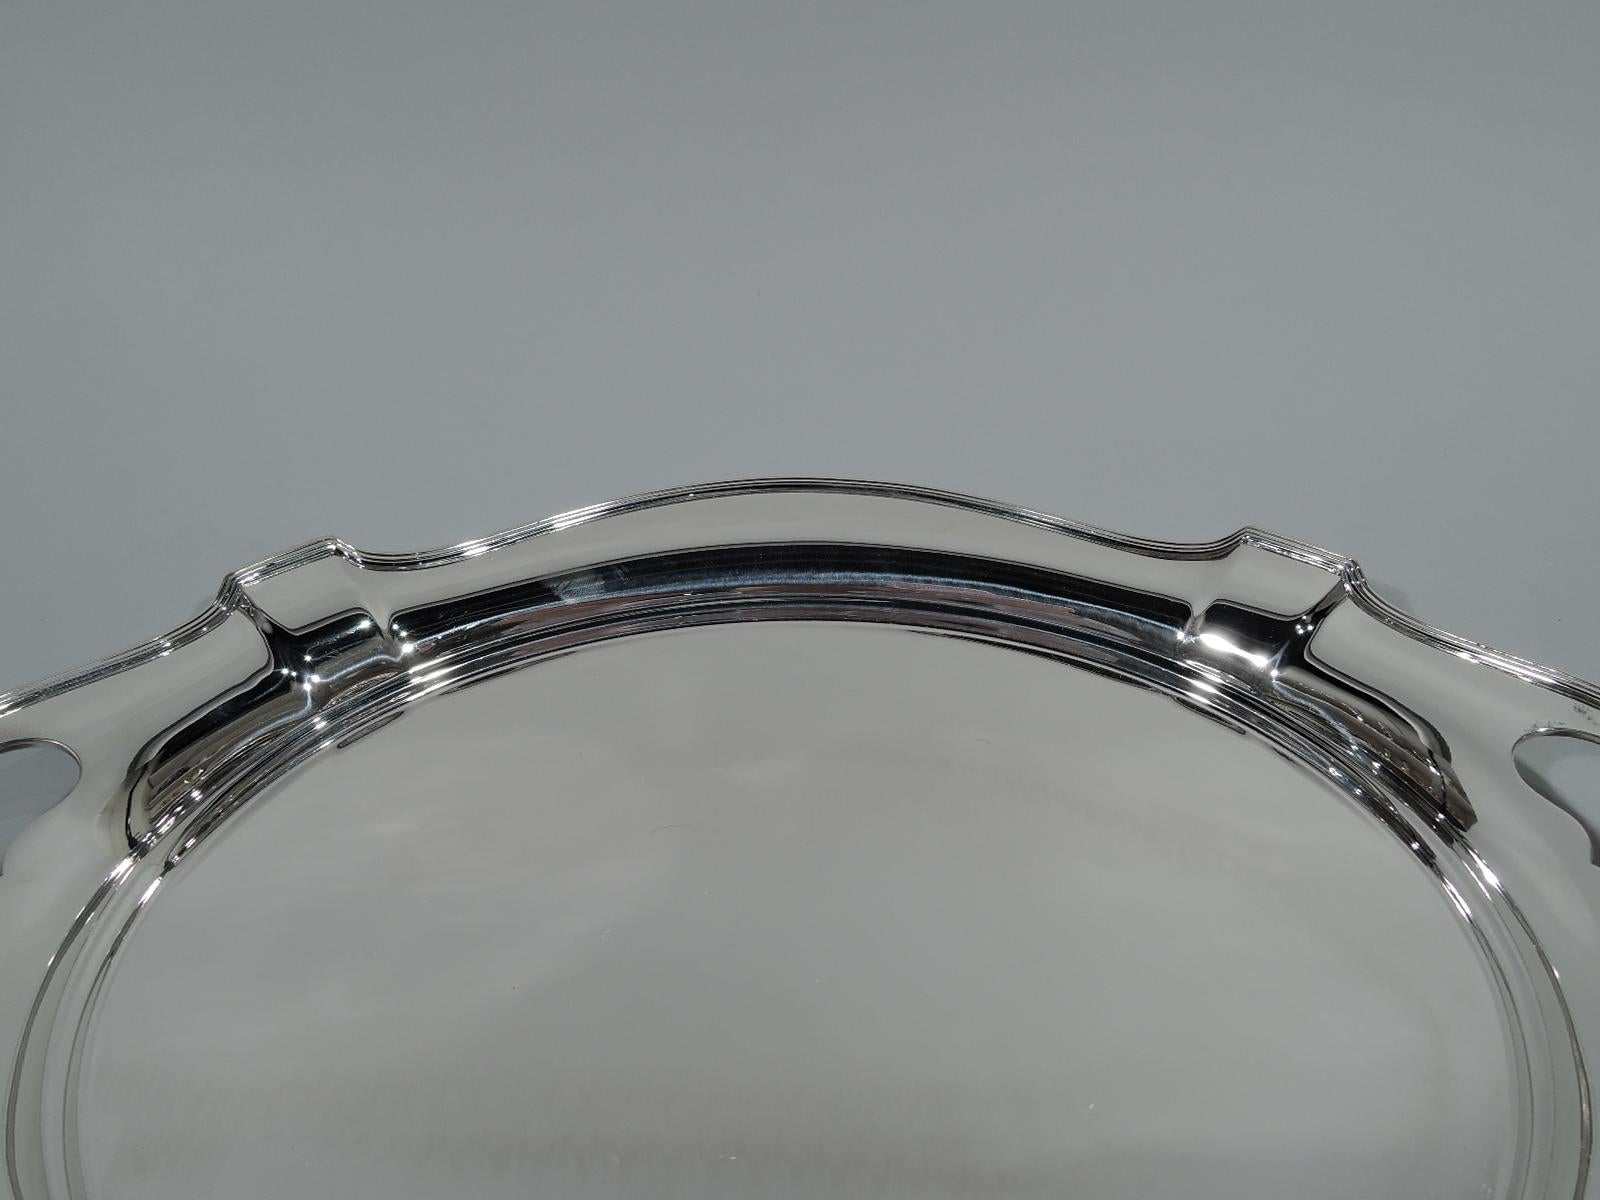 Art Deco sterling silver serving tray in Plymouth pattern. Made by Gorham in Providence in 1919. Oval well and reeded and paneled rim with cutout kidney end handles. Hallmark includes no. A2787 and date symbol. Weight: 26.7 troy ounces.